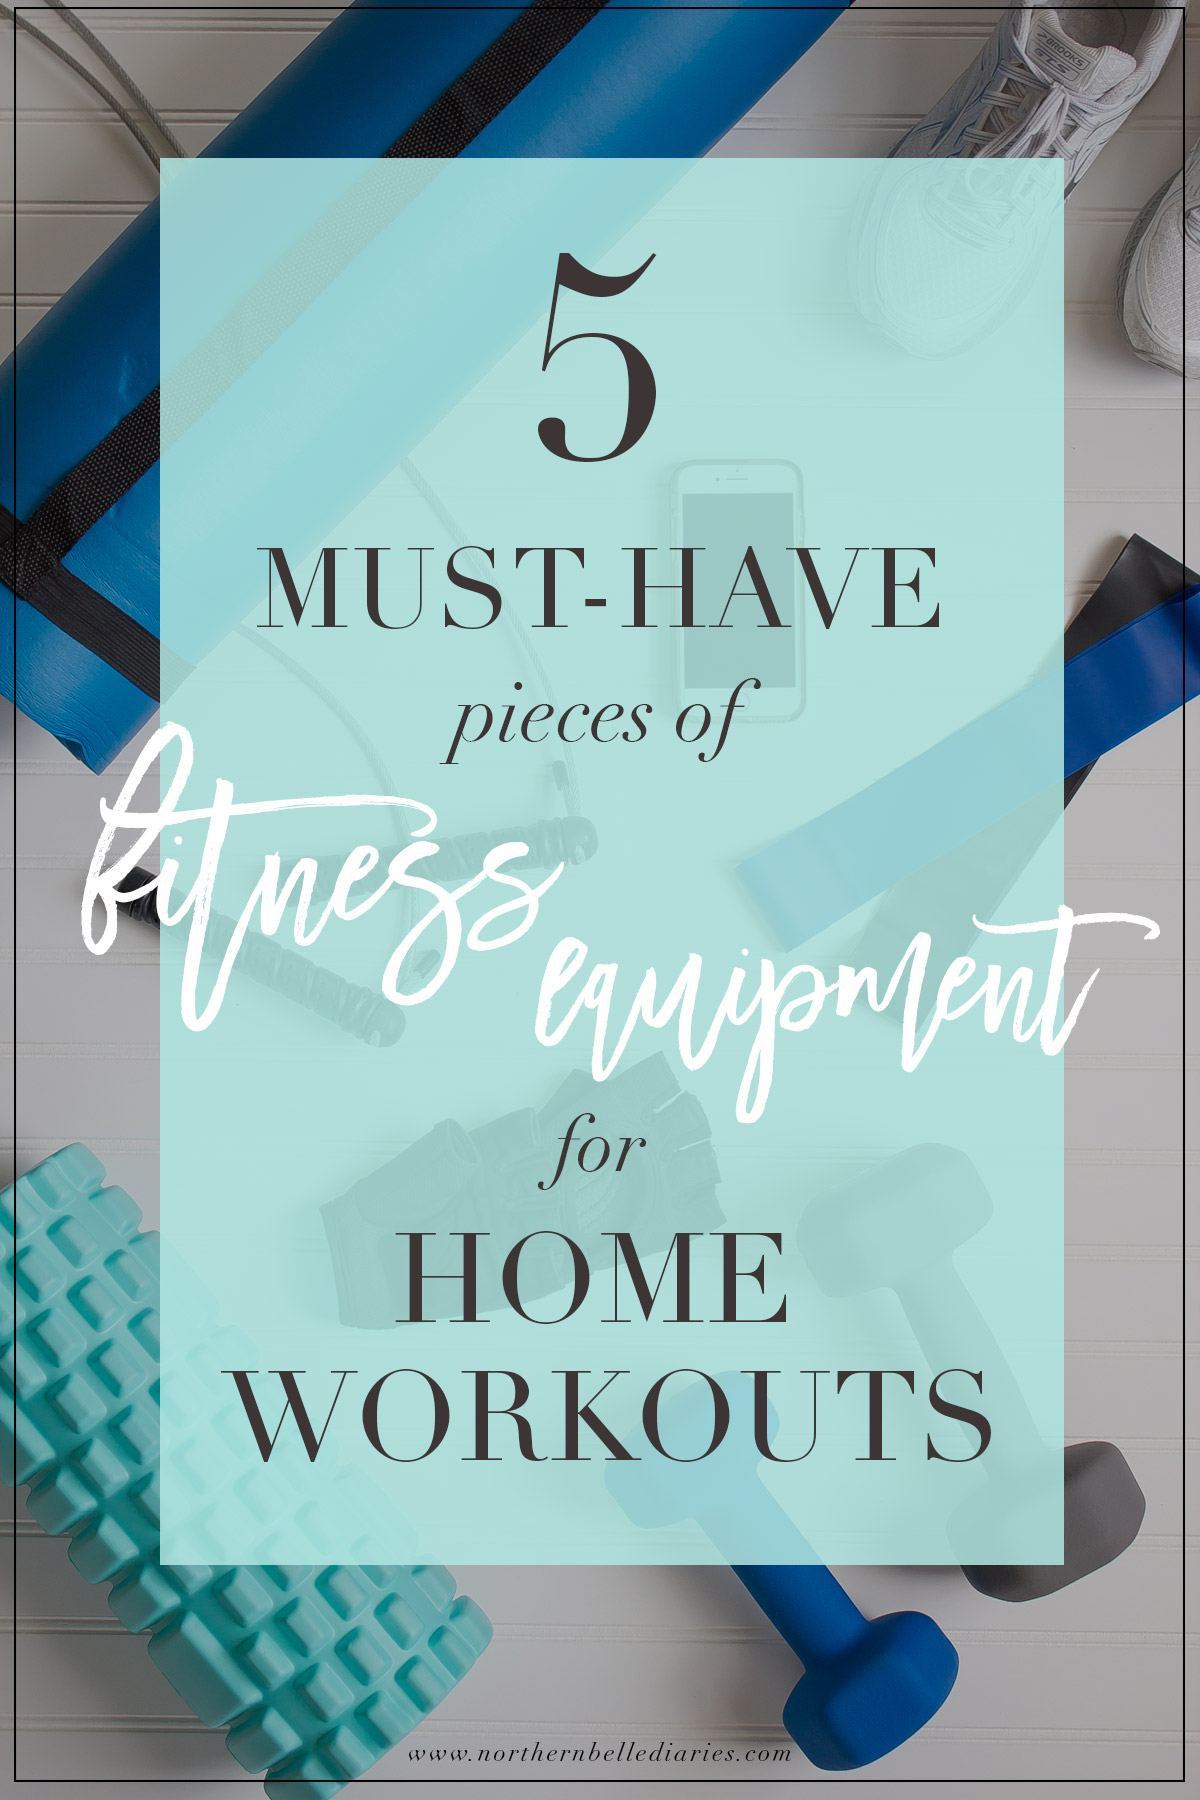 5 Must-Have Pieces of Fitness Equipment for Home Workouts